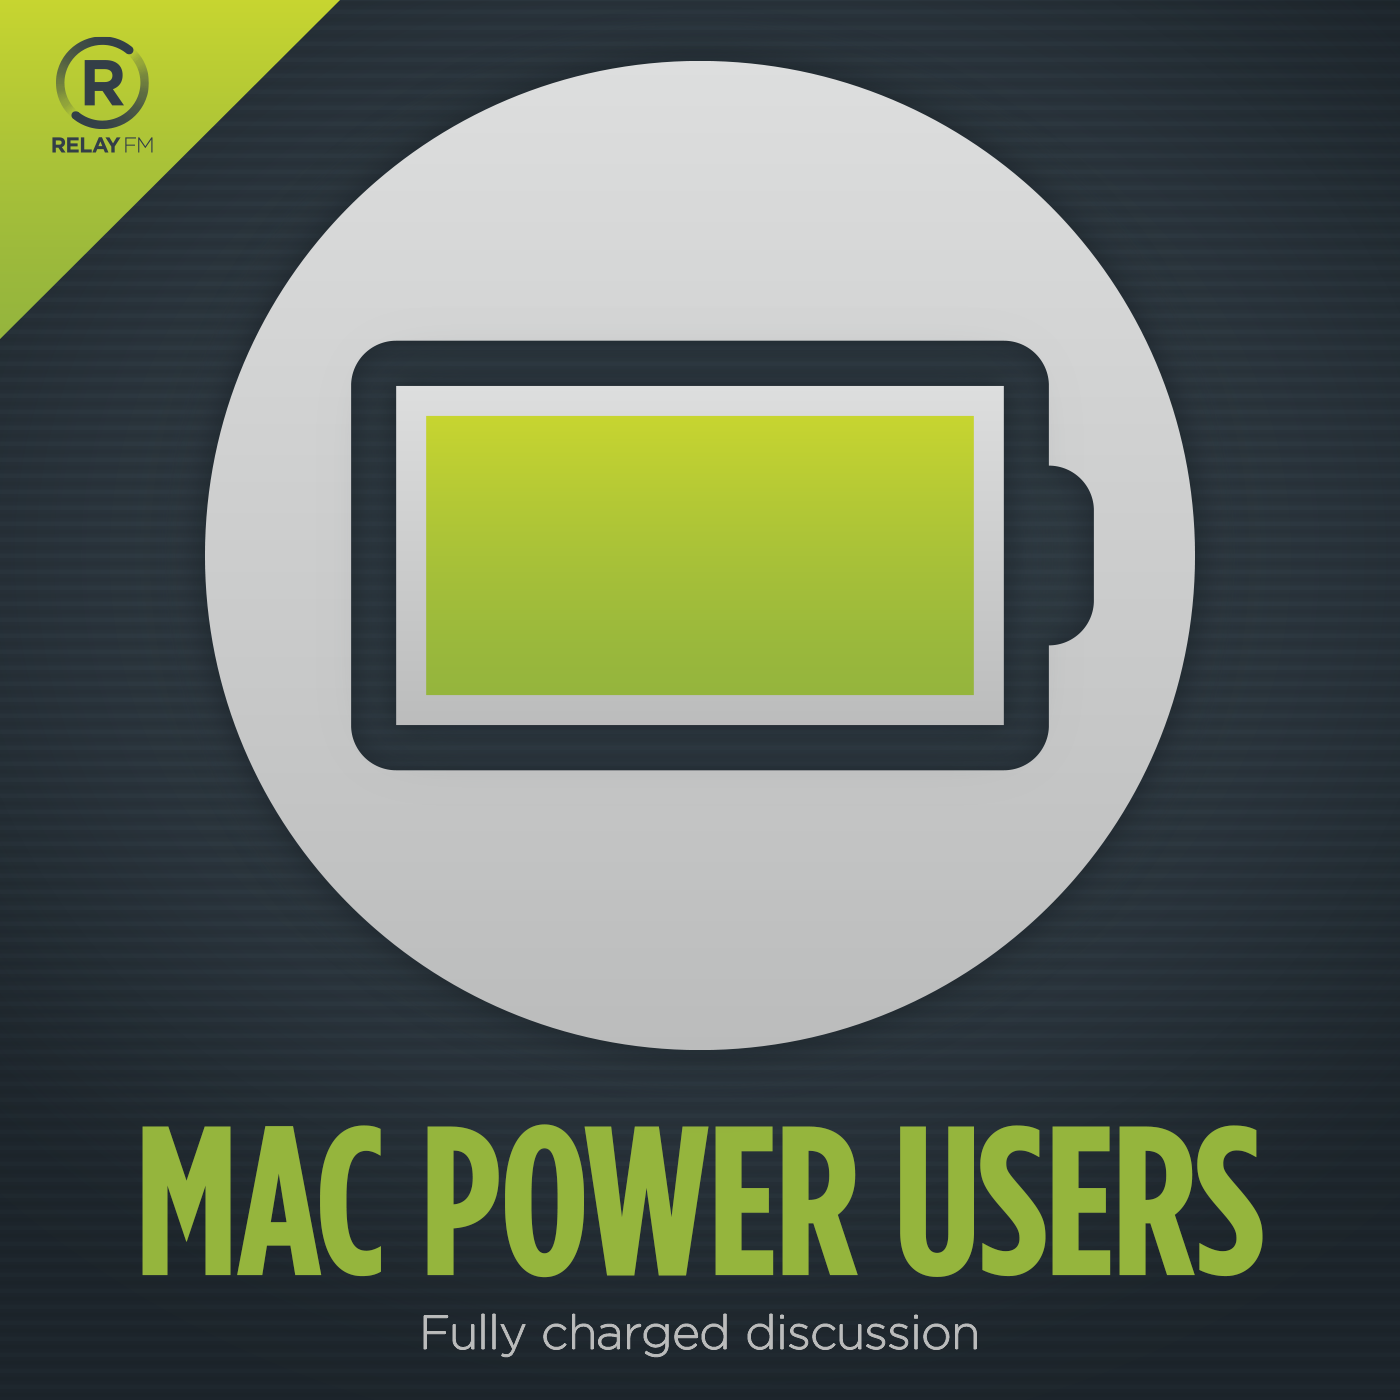 Mac Power Users 616: The Quality Will Be Ensured, with Daniel Jalkut – Draft